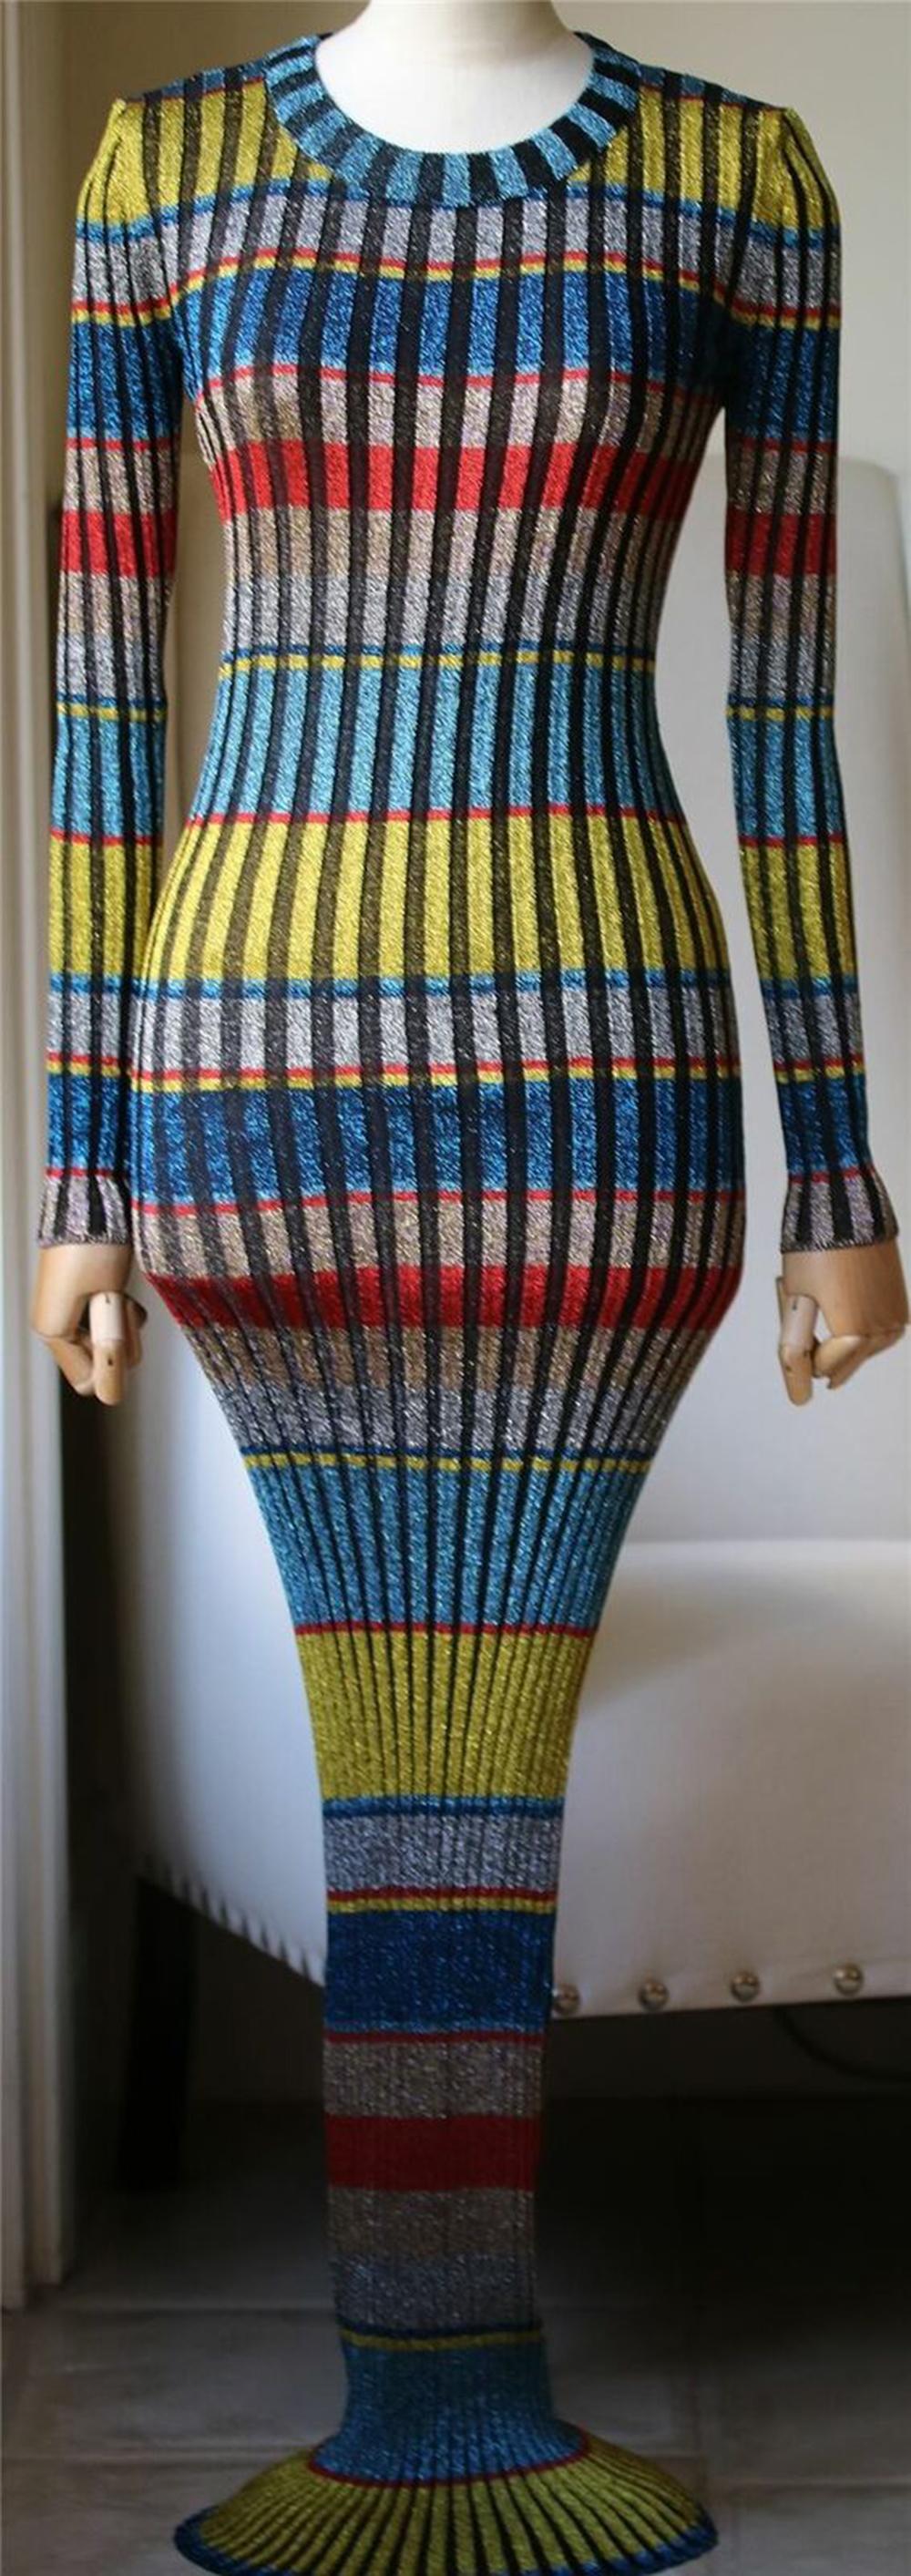 This Fall runway piece is knitted with contrasting metallic striped threads and cut for a close fit. Multicolored ribbed-knit. Slips on. 60% viscose, 25% cupro, 15% polyester. Made in Italy.

Size: IT 40 (UK 8, US 4, FR 36)

Condition: As new